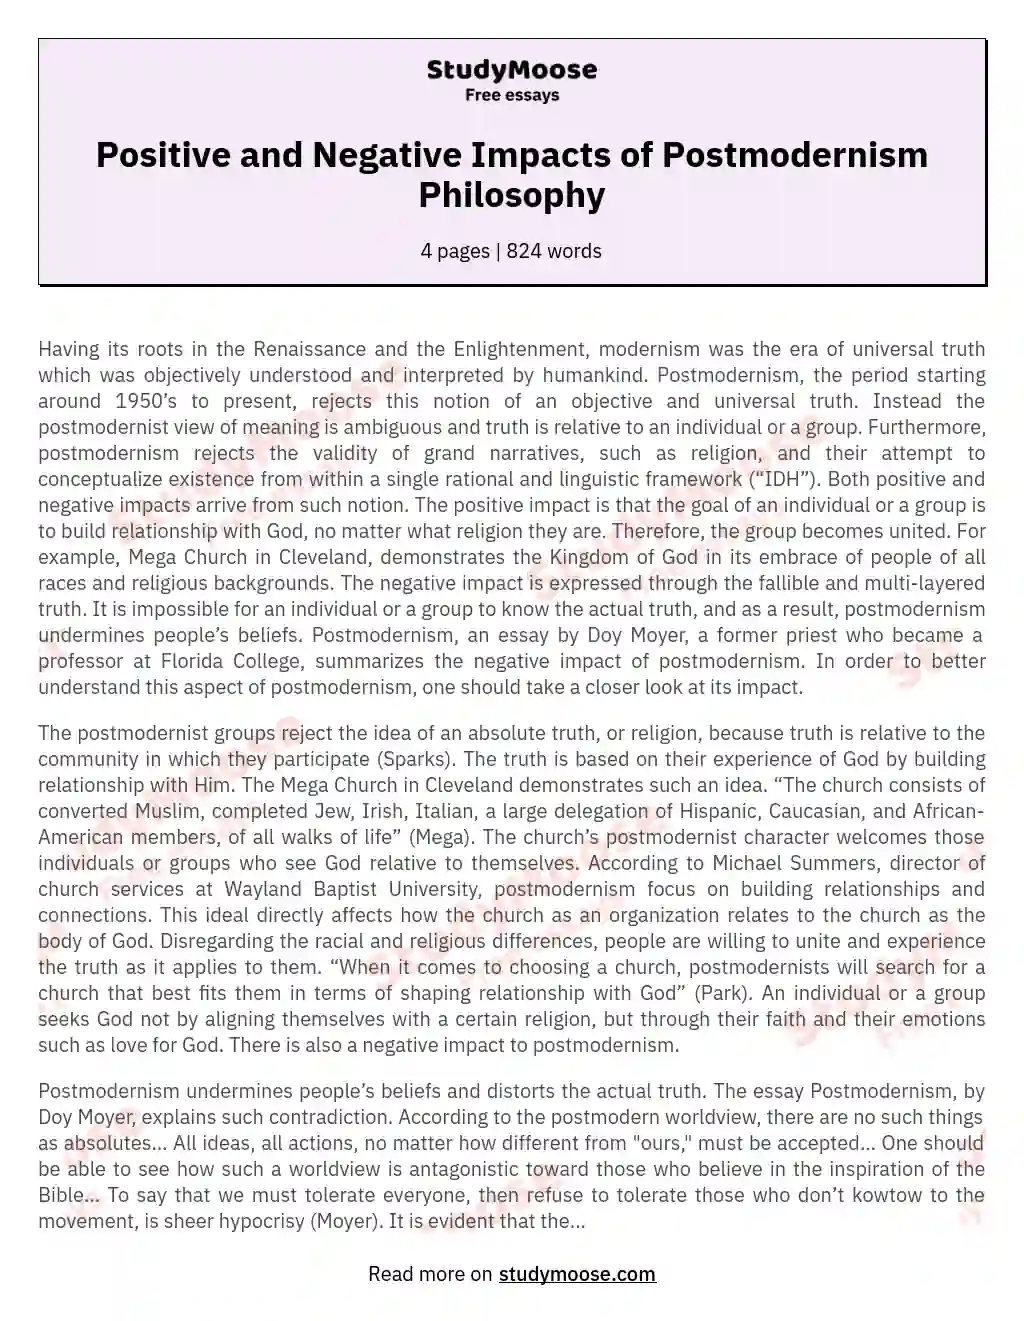 Positive and Negative Impacts of Postmodernism Philosophy